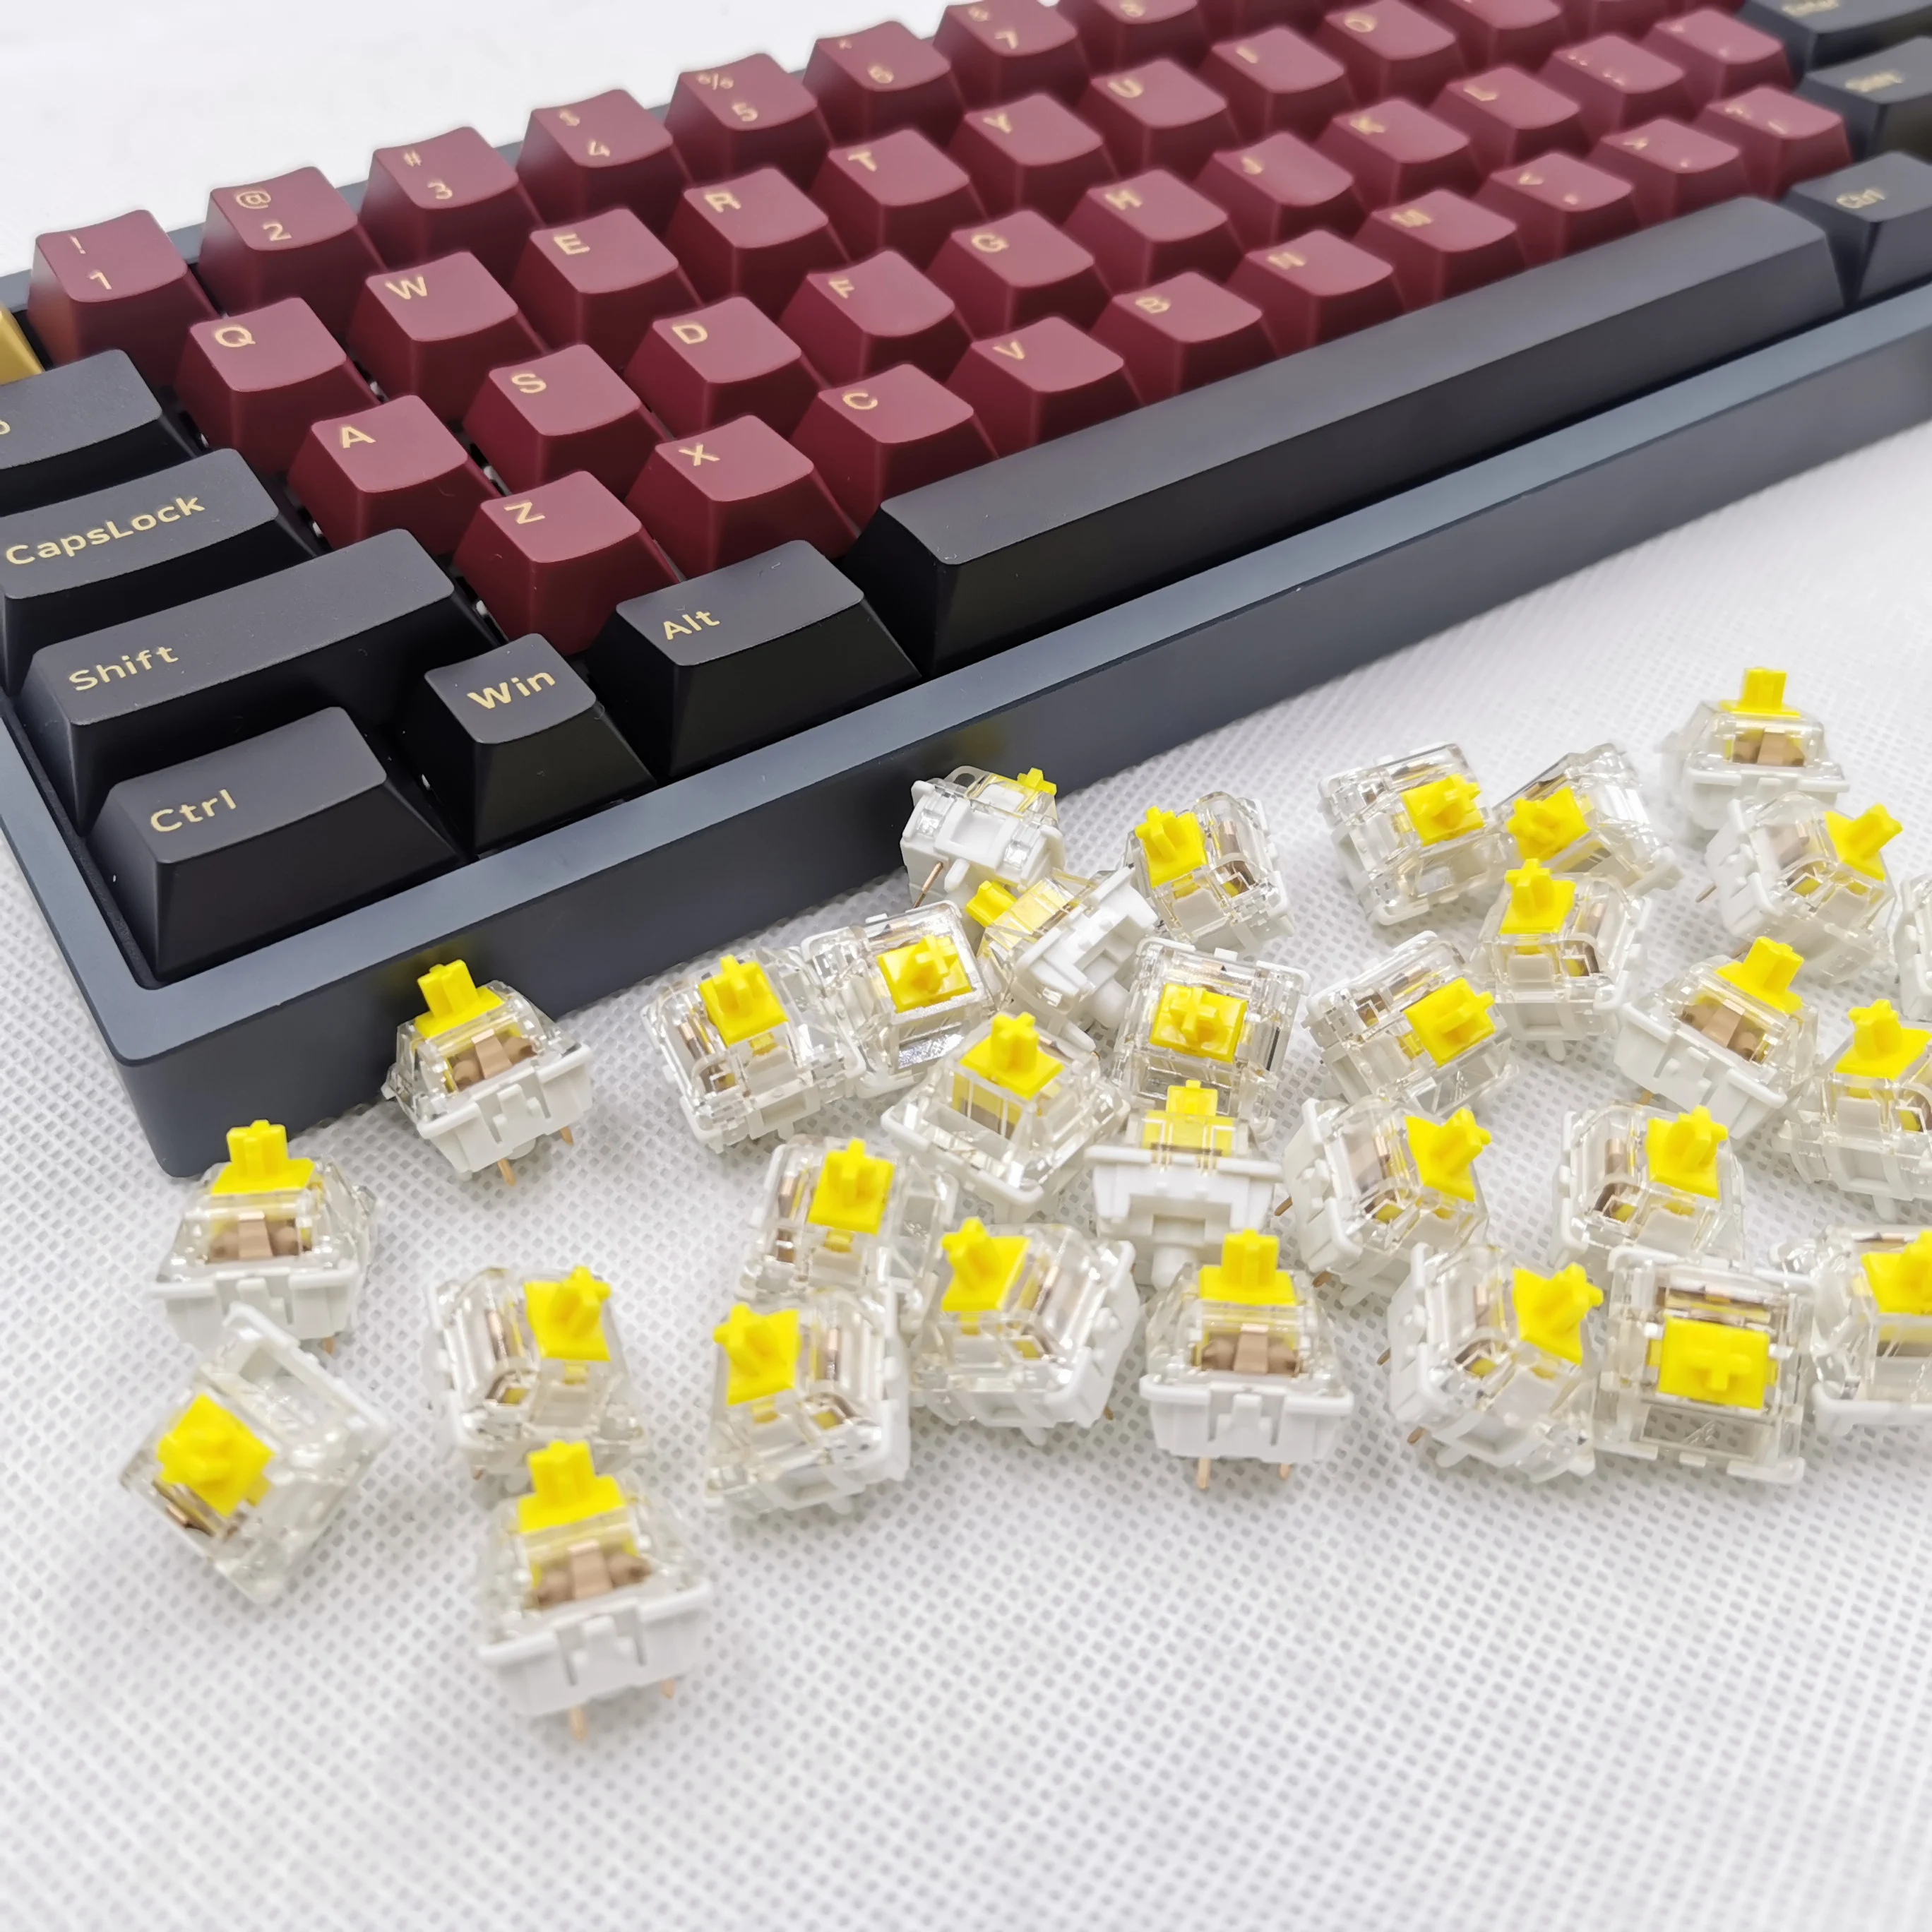 
Tecsee New Material DIY Custom Mechanical Gaming Keyboard 66 /87/104/ Keys Switches Keyboard Linear Or tactile for Gamer 